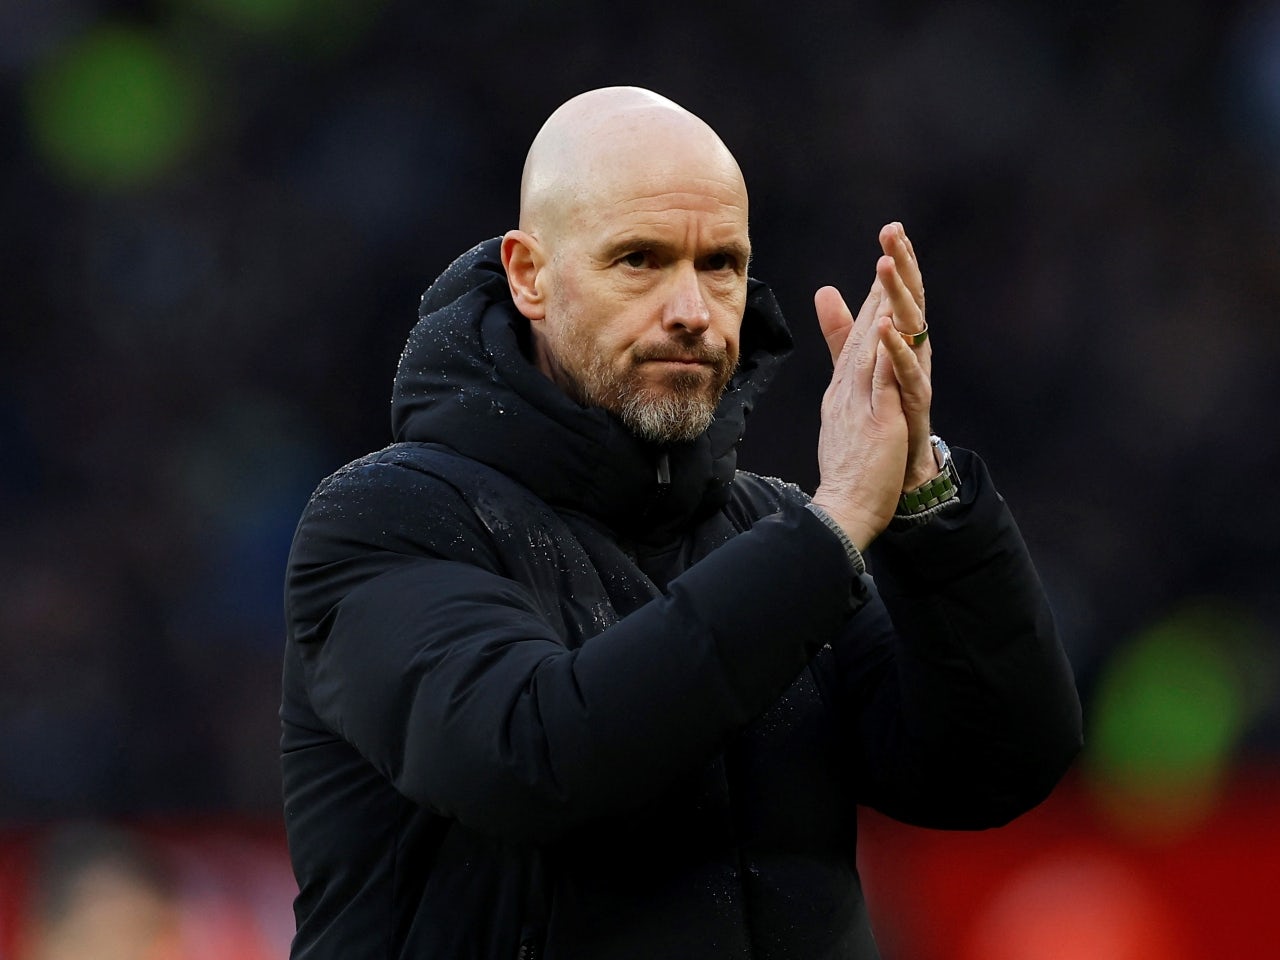 Sacking Erik ten Hag this season 'would cost Manchester United £10m'